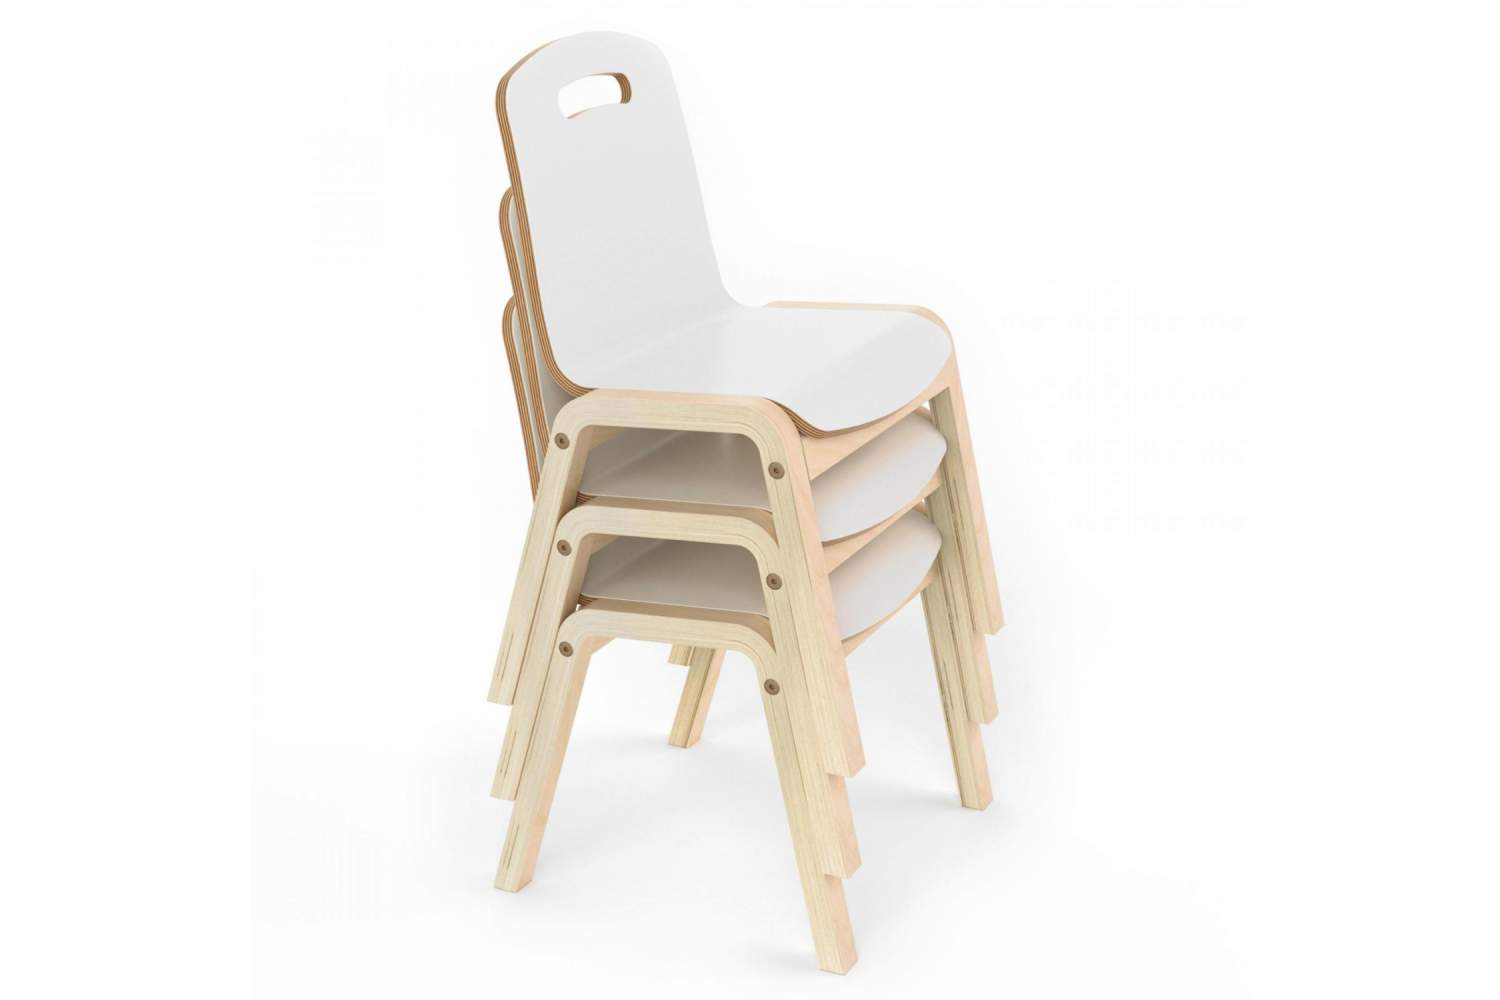 Starship Chair - Scandinavian Birch Ply with White HPL 3 Chairs Stacked